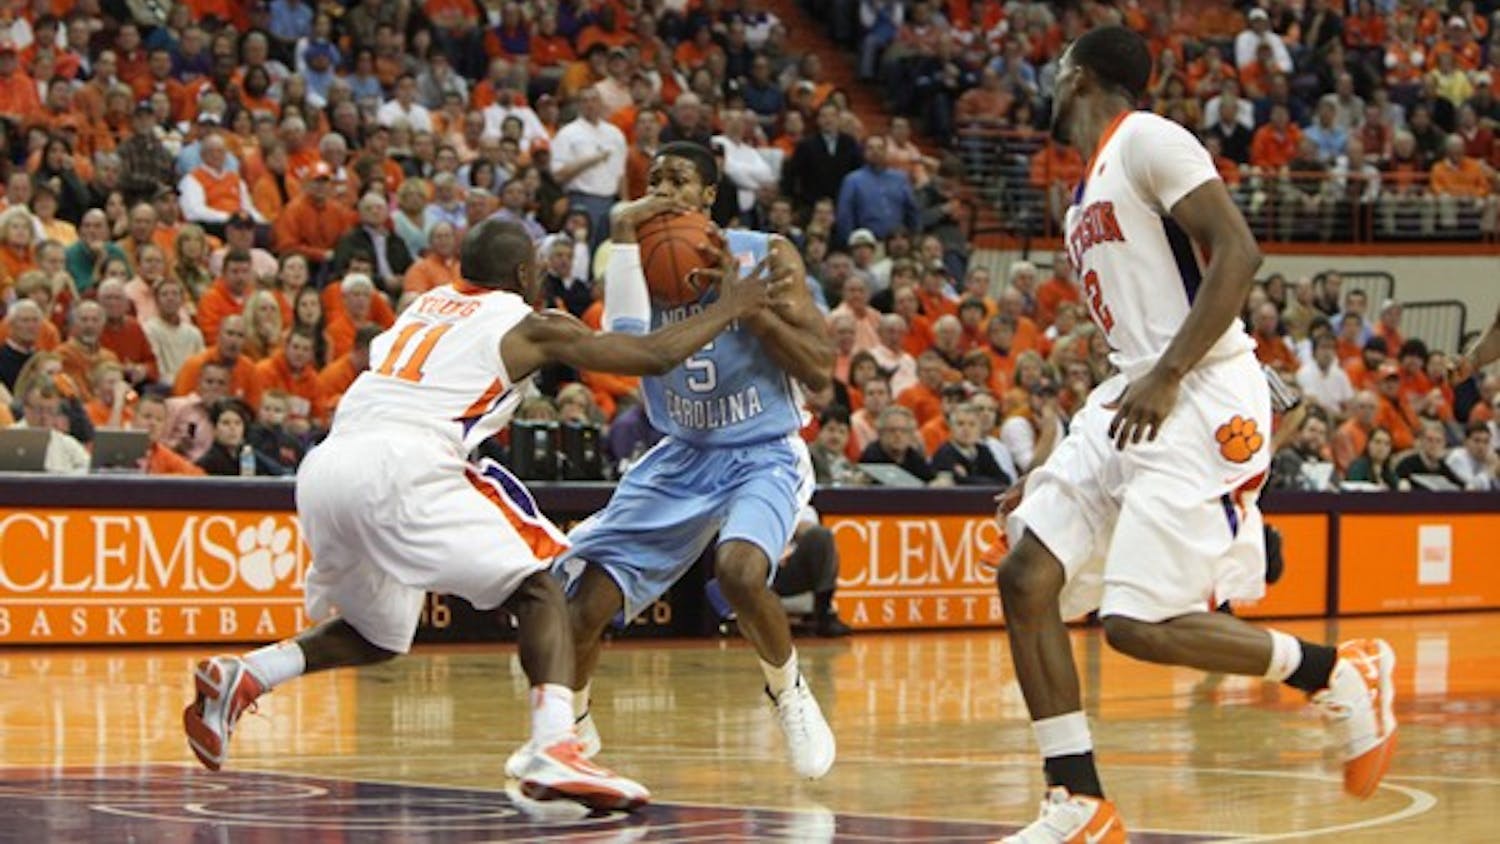 UNC’s Dexter Strickland committed three turnovers against Clemson. DTH/Phong Dinh